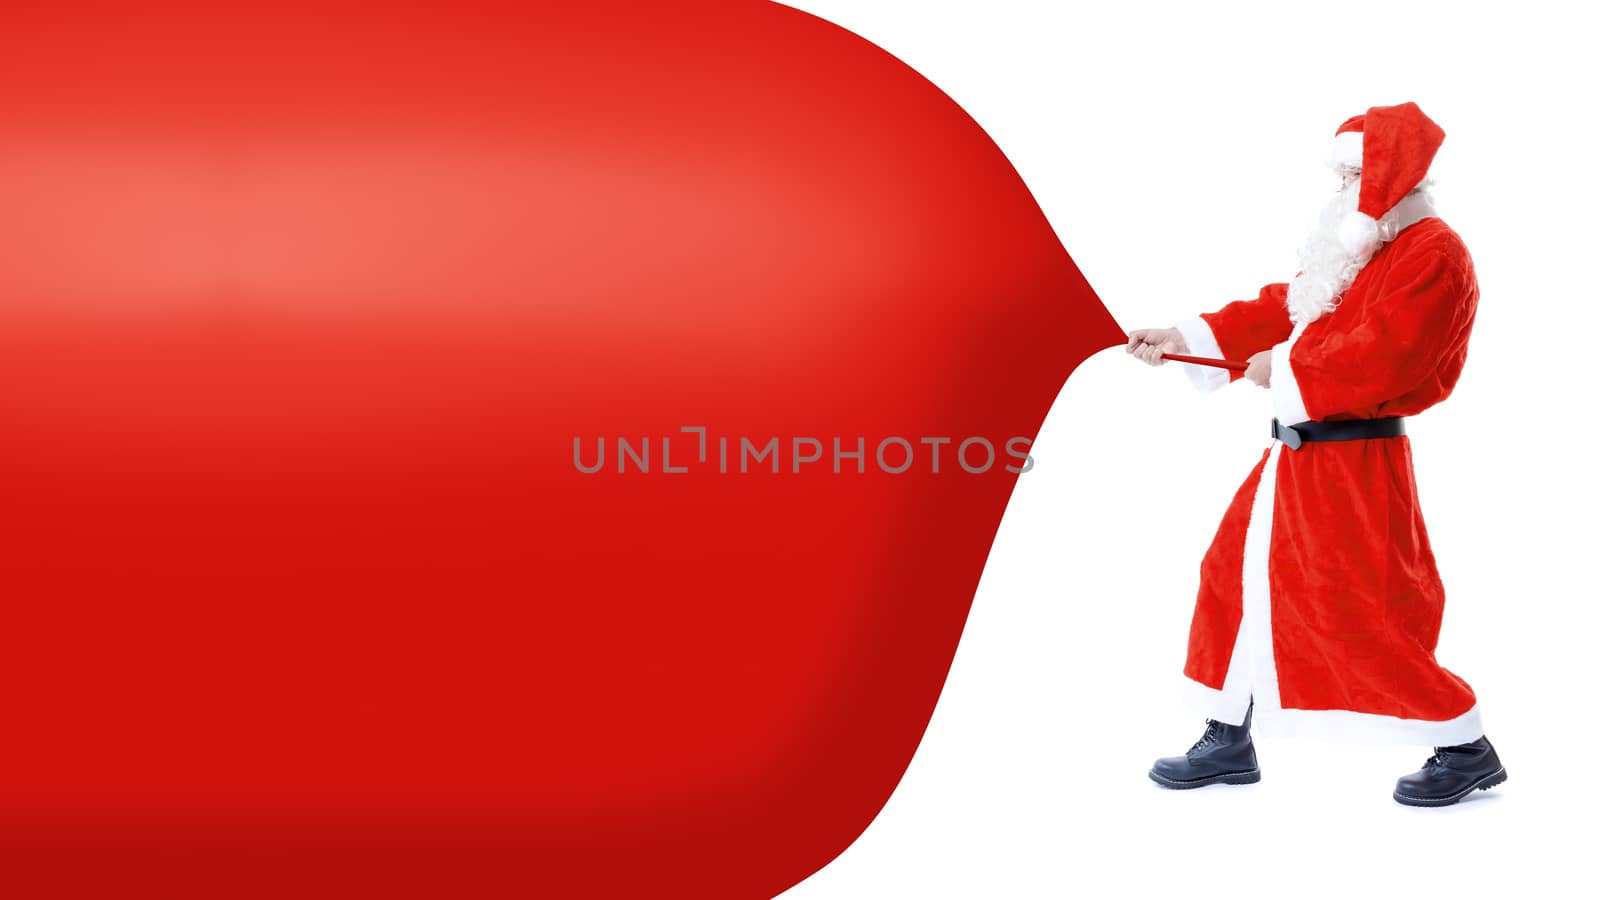 An image of Santa Claus is pulling something